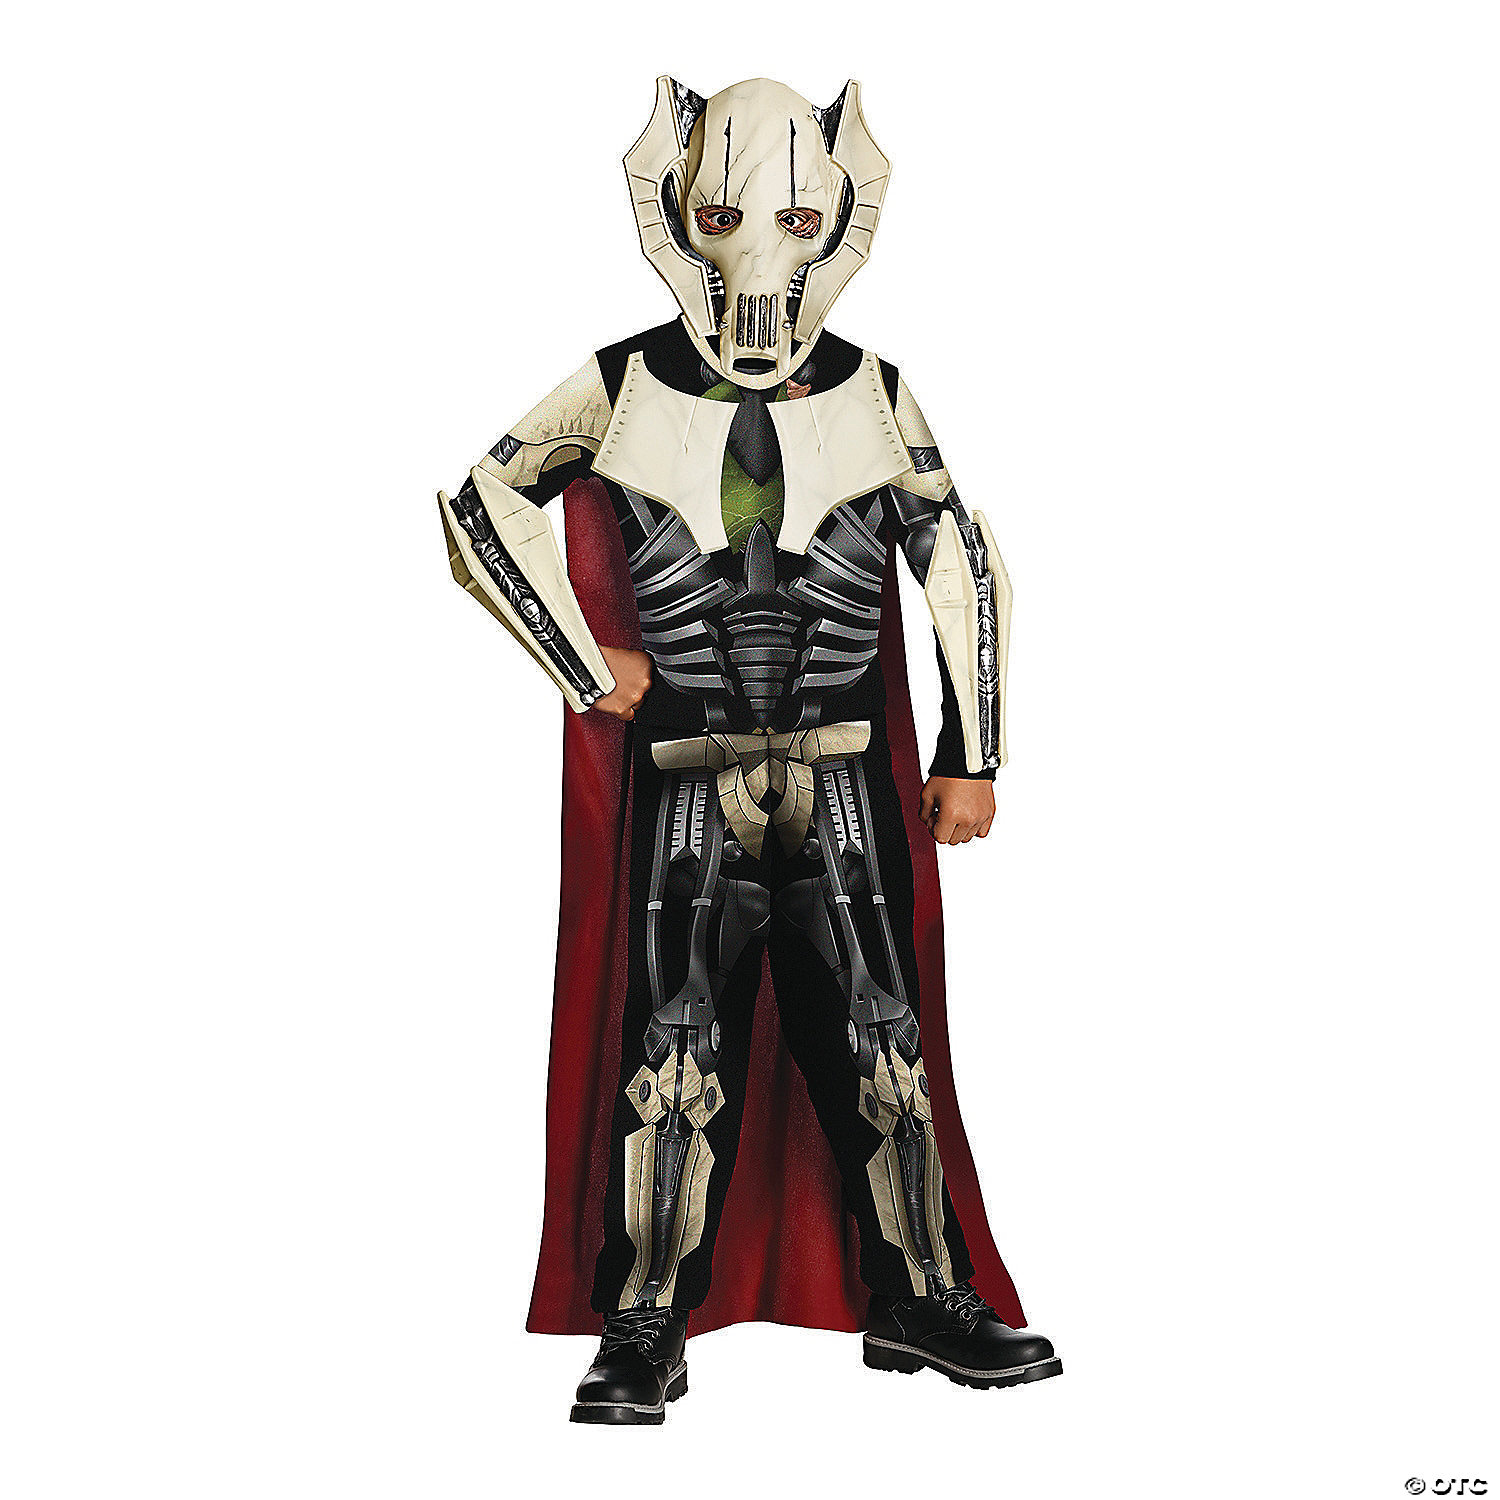 Boy's Deluxe Star Wars General Grievous Costume - Small